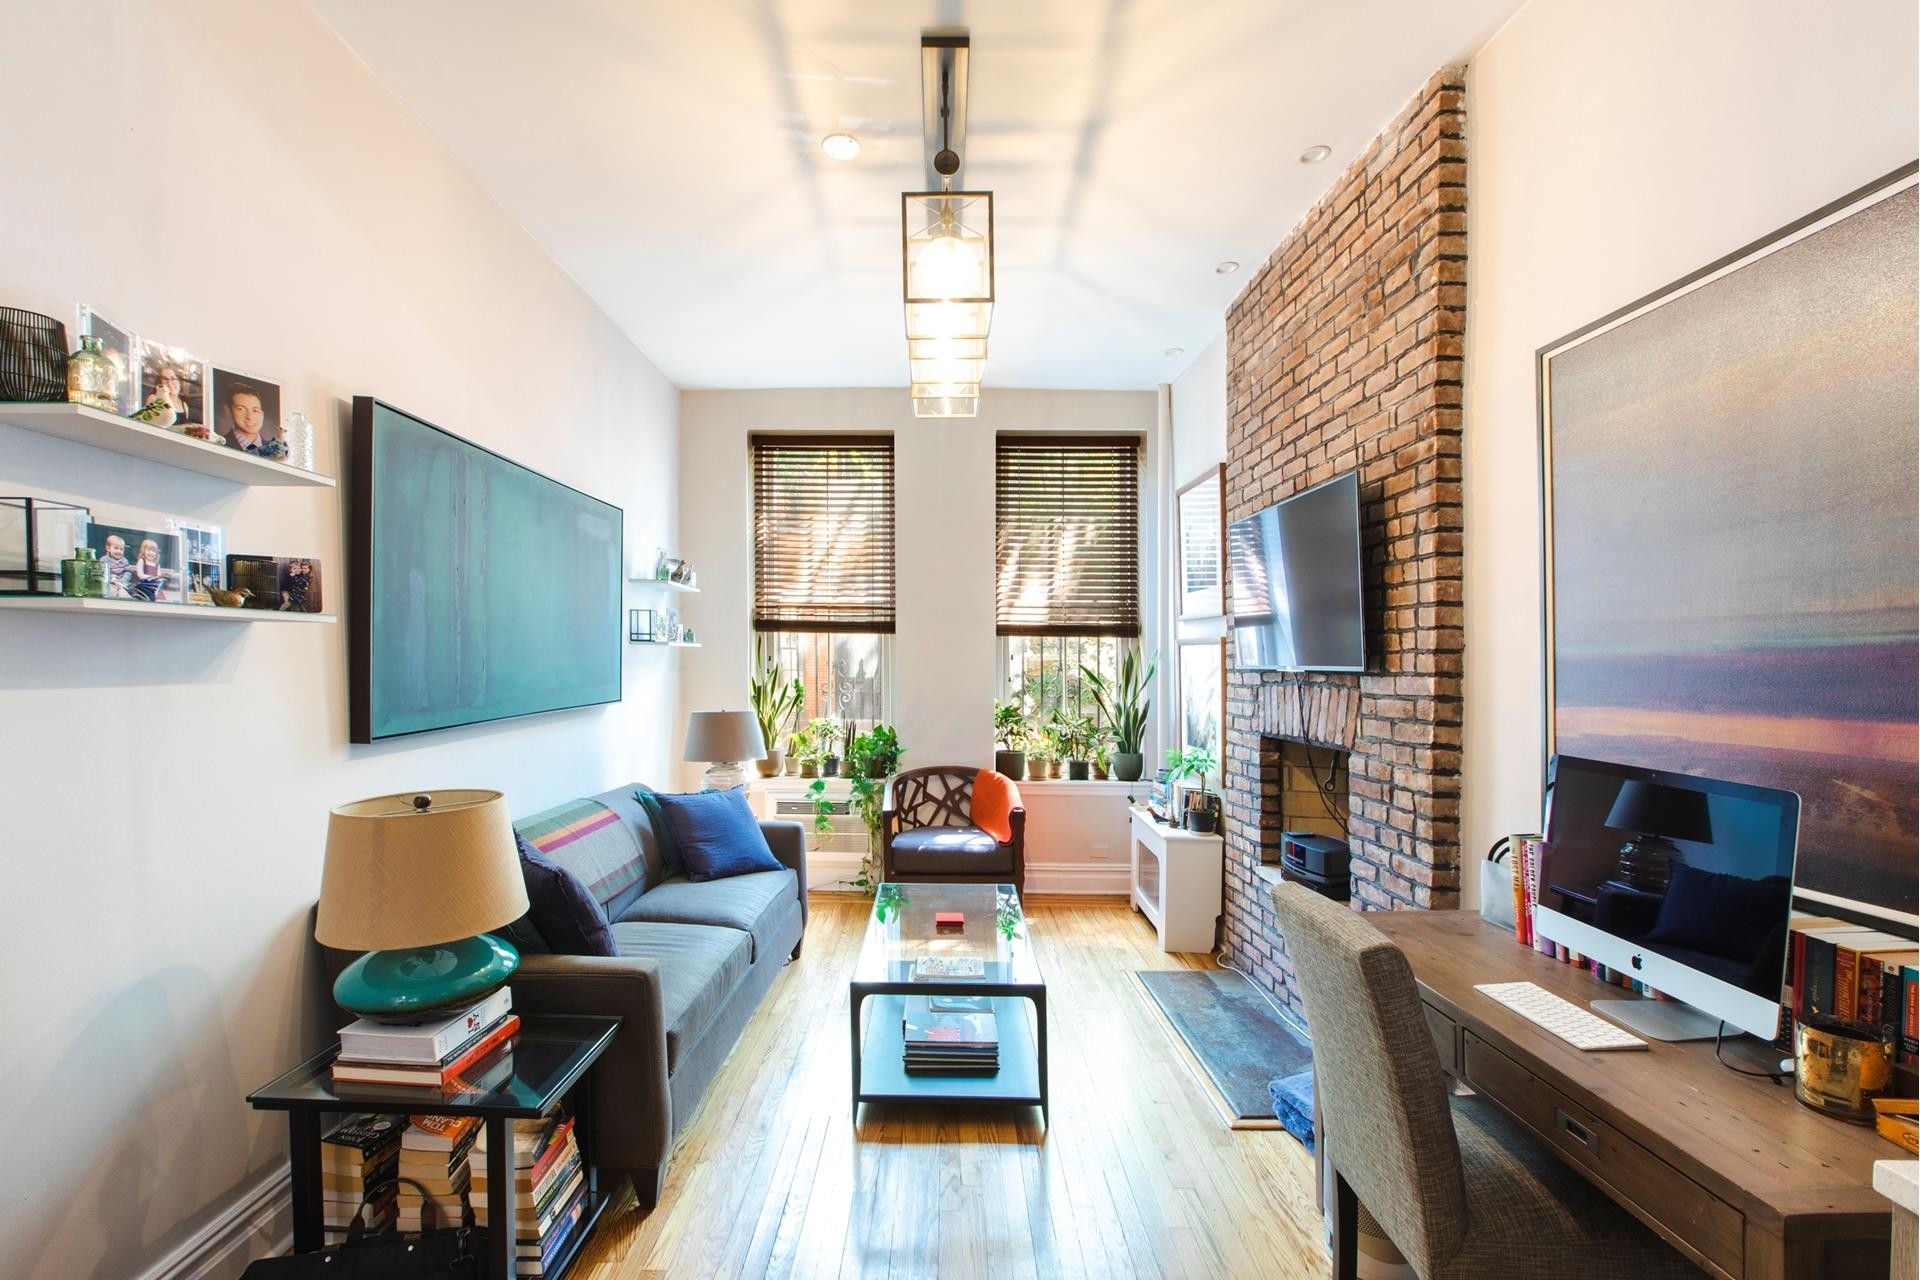 Property at 306 W 4TH ST, A3 West Village, New York, New York 10014